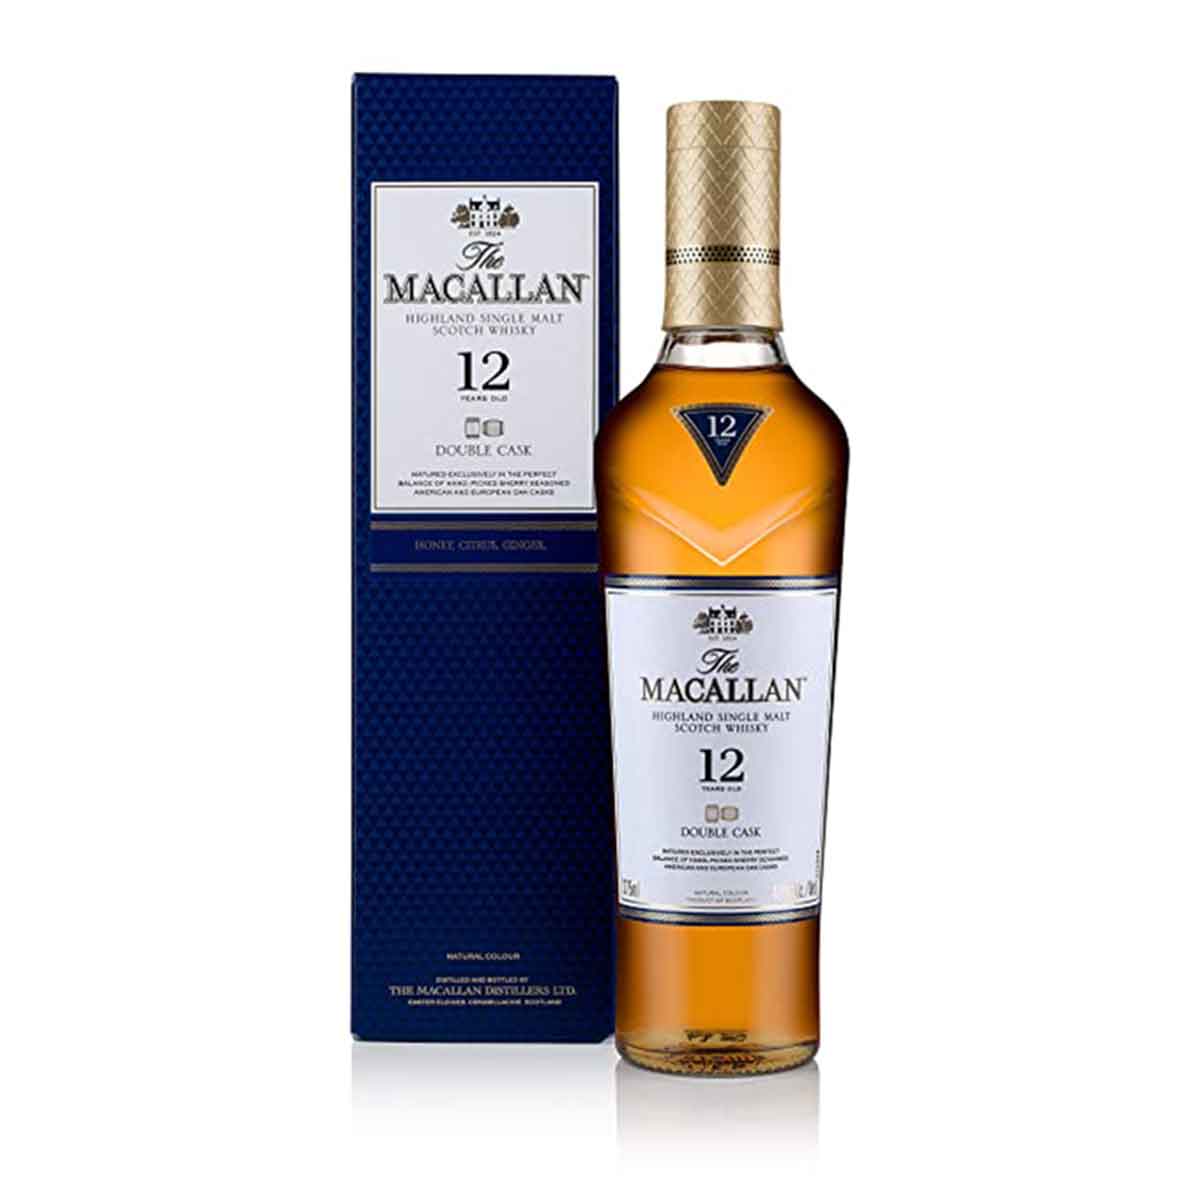 TAG Liquor Stores BC-MACALLEN 12 YEARS OLD DOUBLE CASK 375ML.